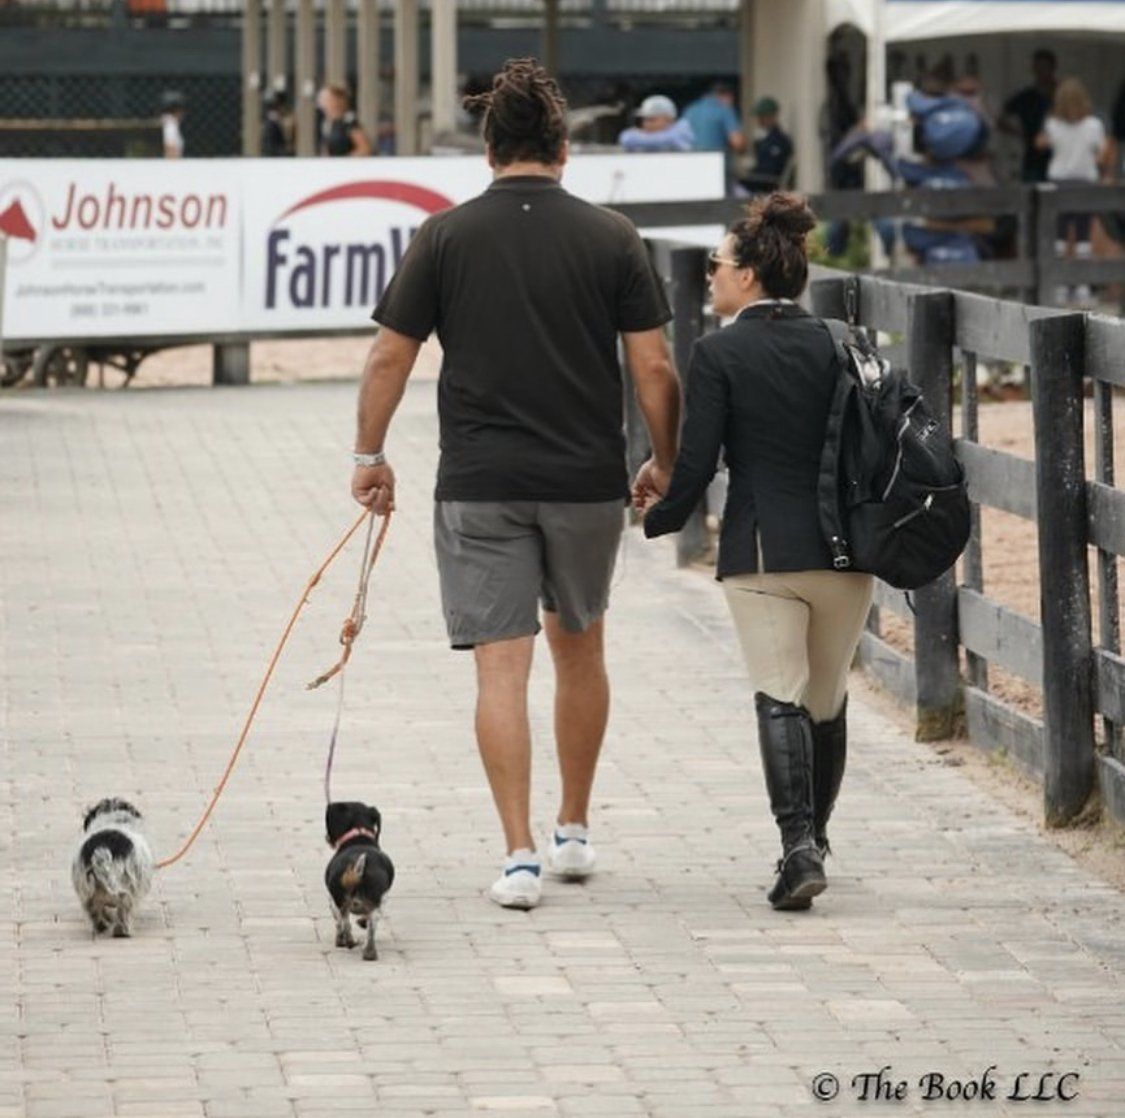 EquiFit Founder and President, Alexandra Cherubini, walking away from the camera with her husband and their two dogs.